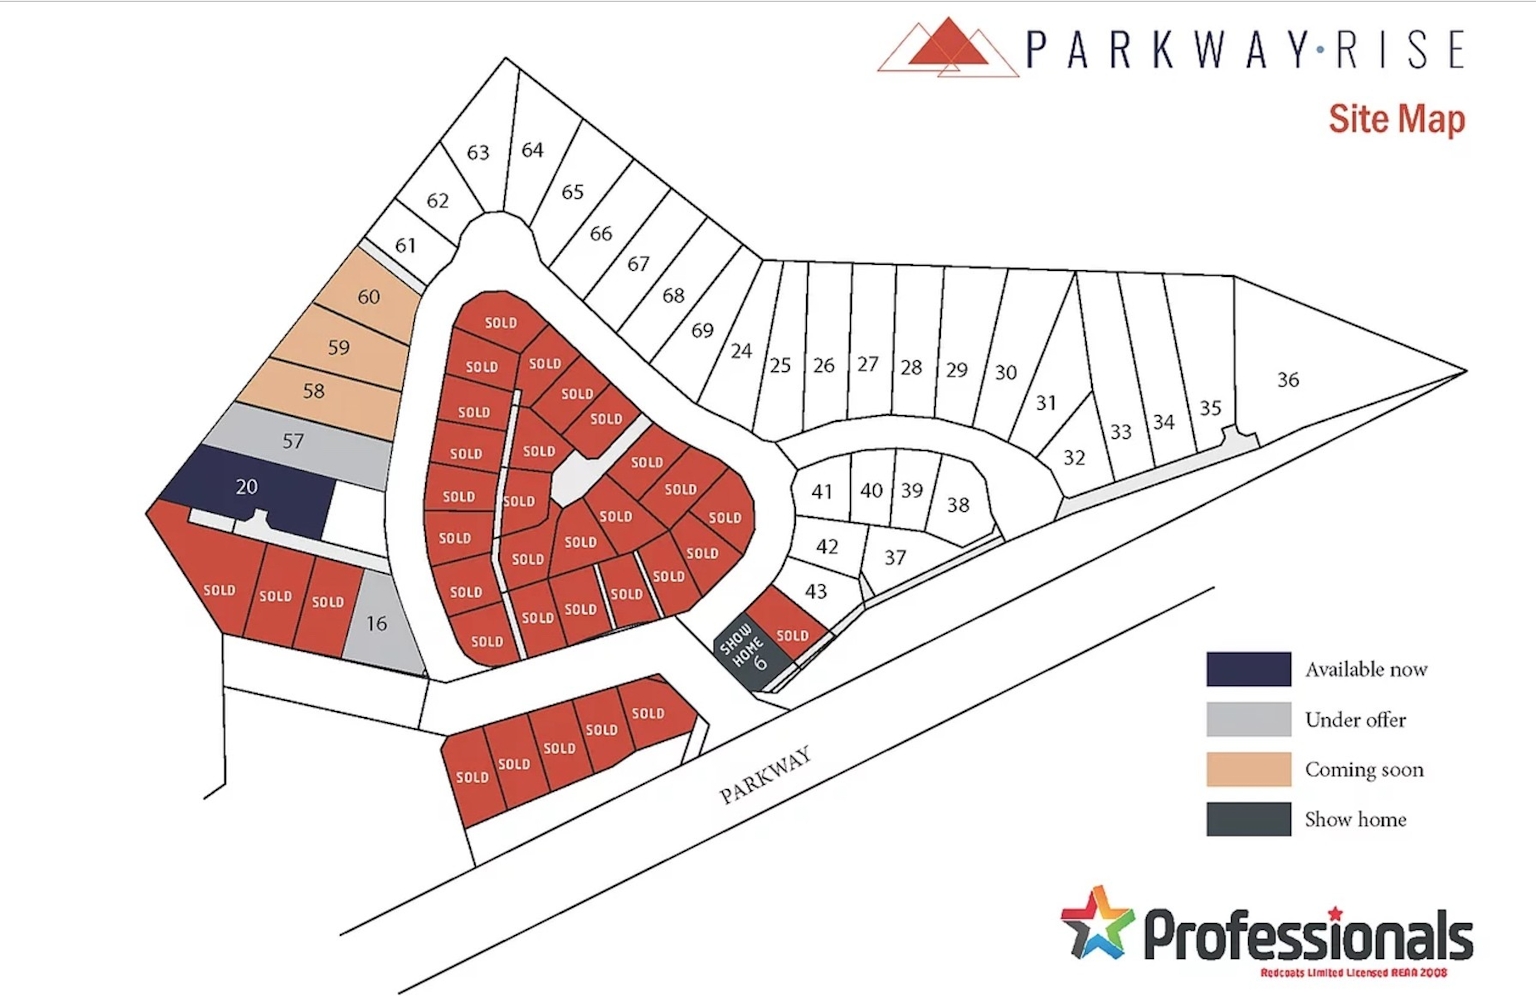 Parkway Rise stages image